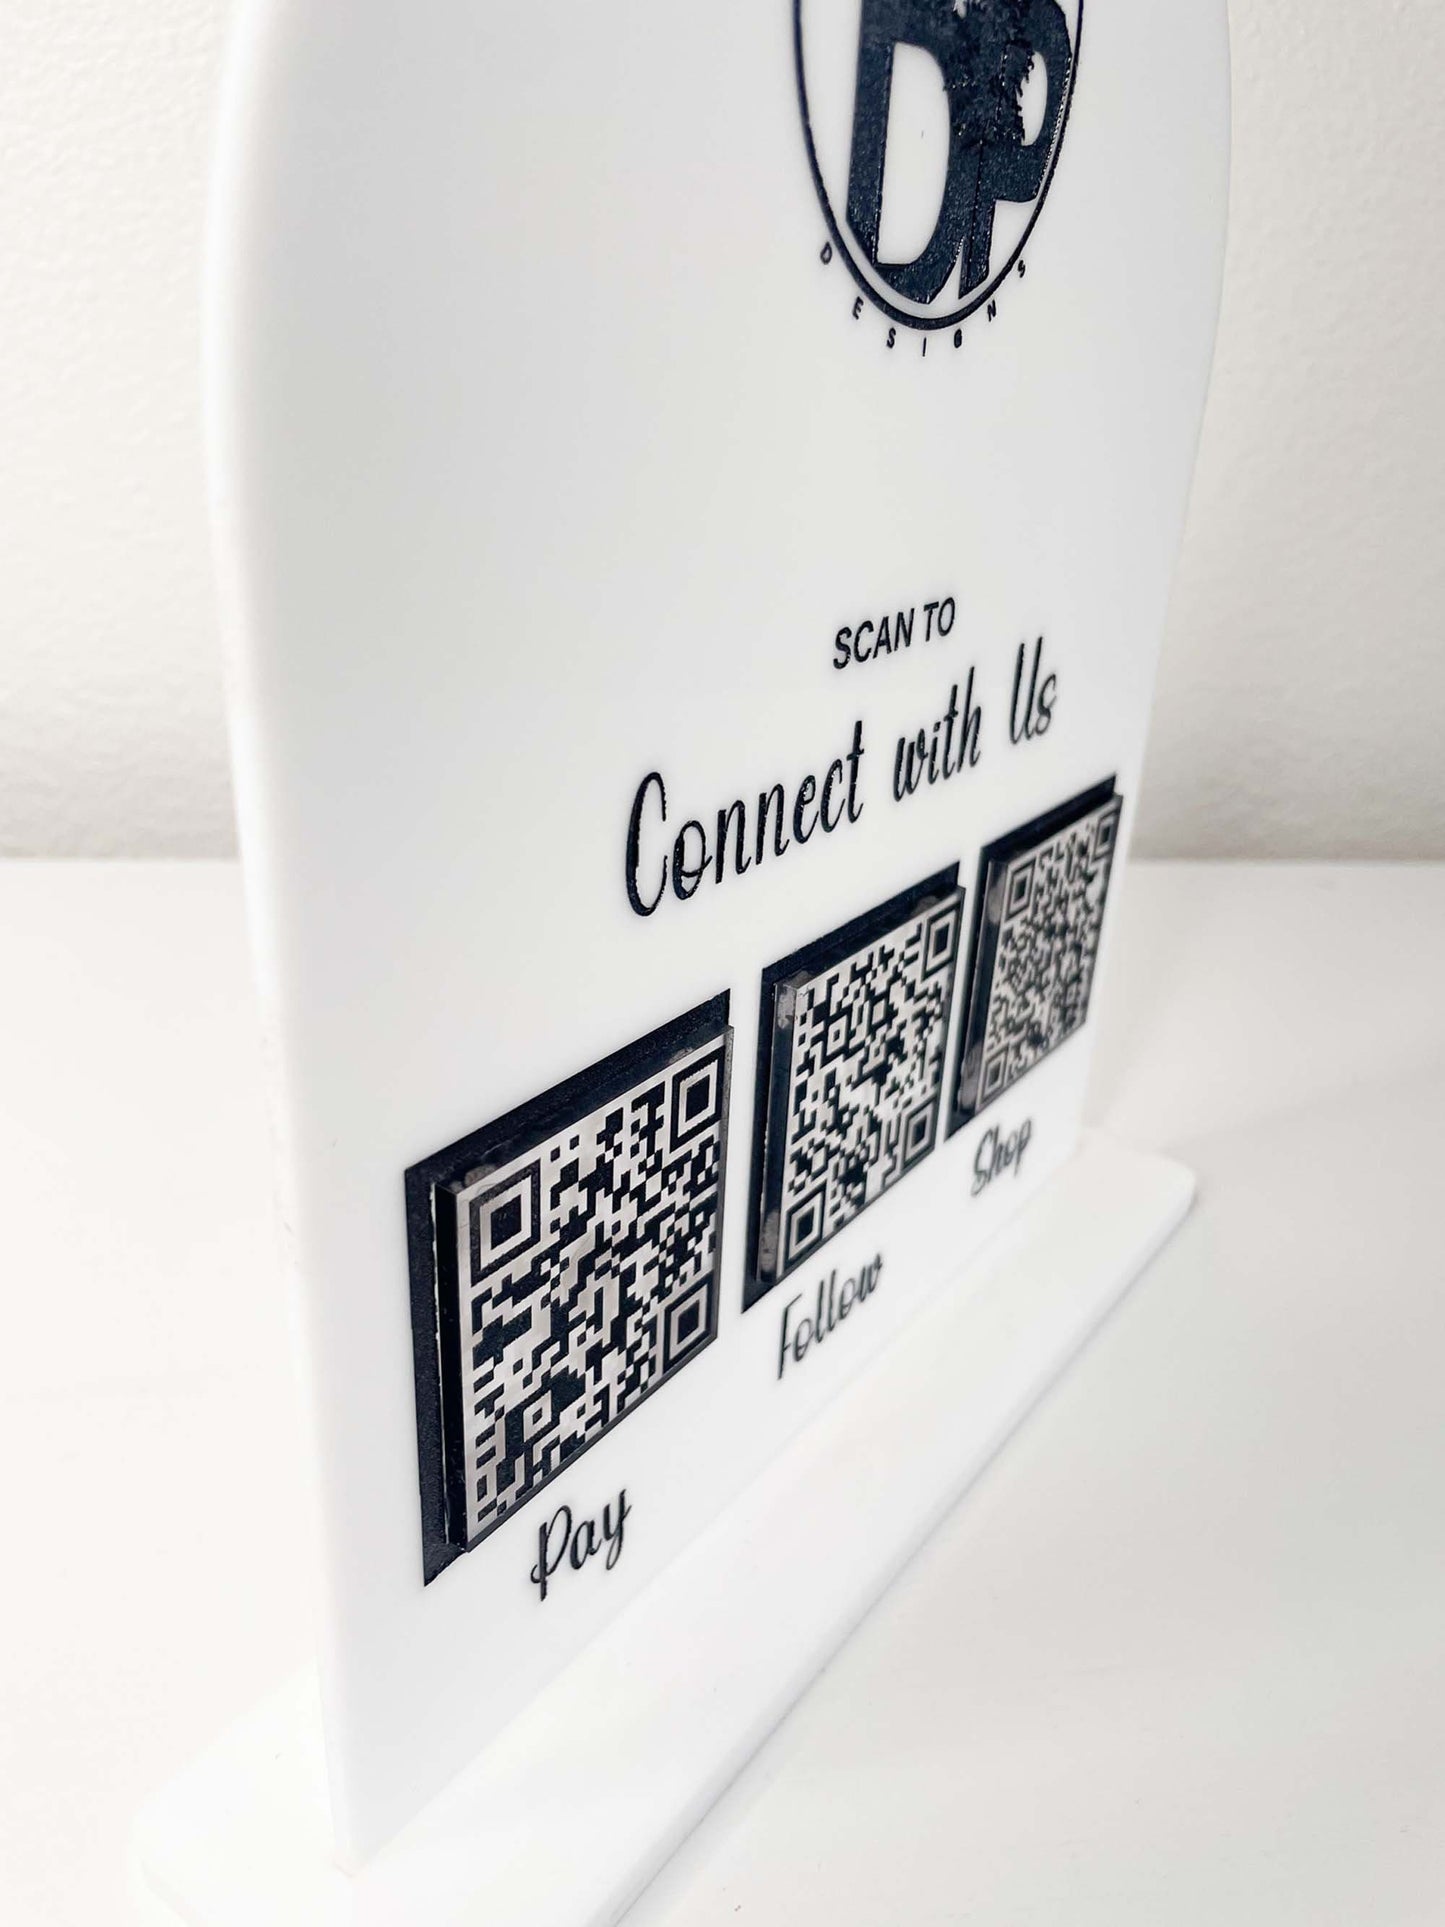 QR code sign large, Market sign, Customizable Business Connect sign. QR code connect with us sign. Vendor, Market QR code scan sign.